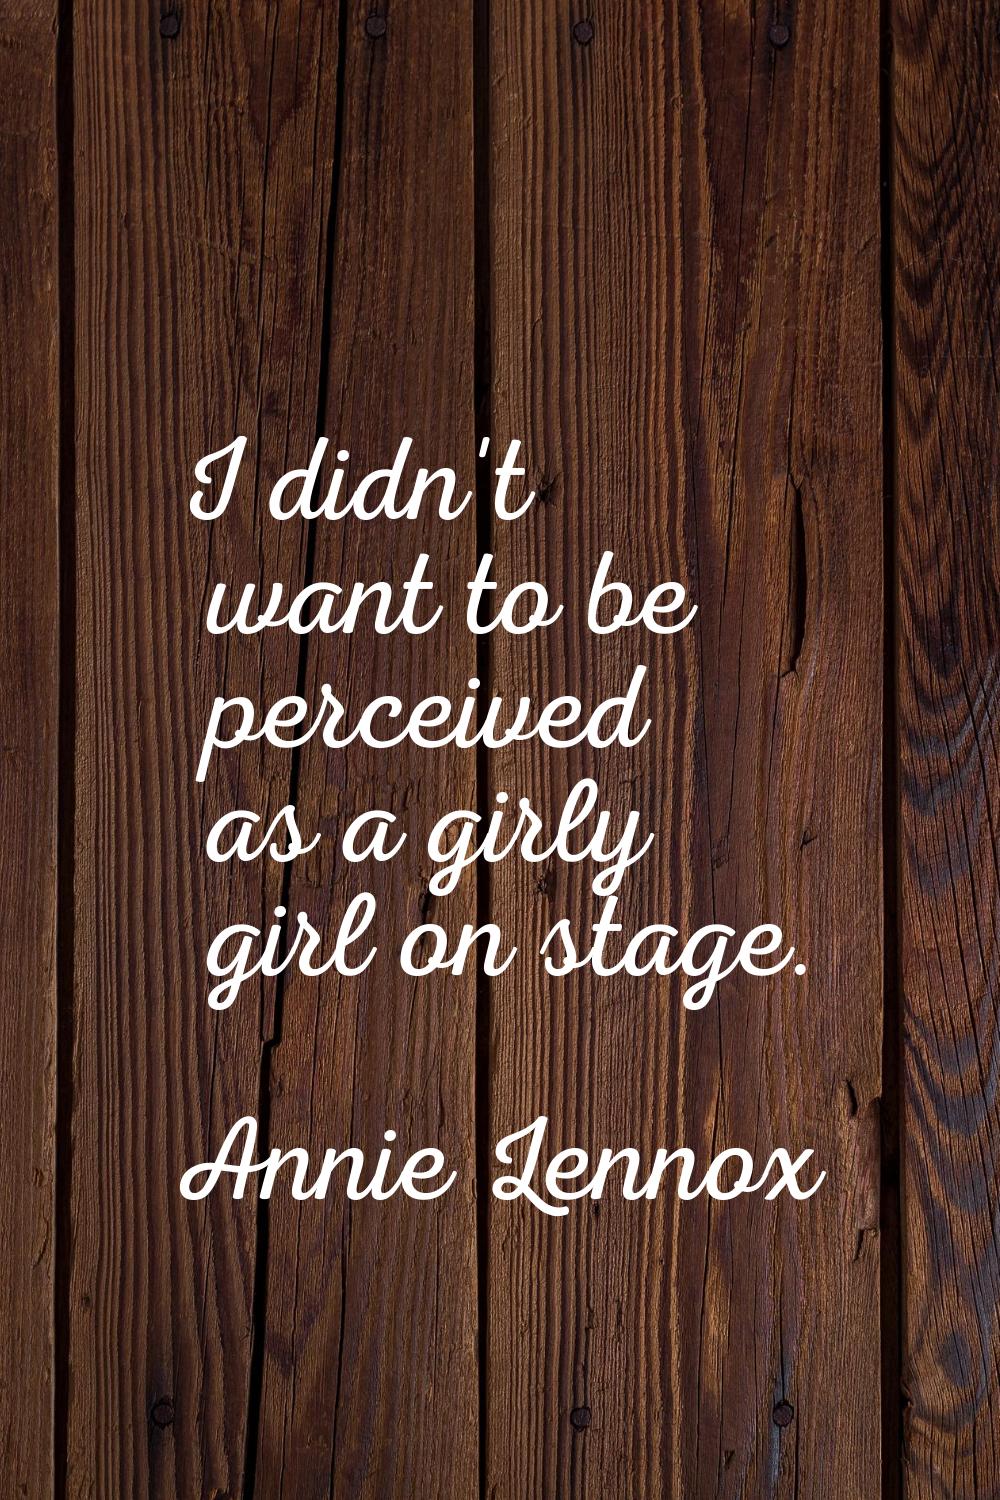 I didn't want to be perceived as a girly girl on stage.